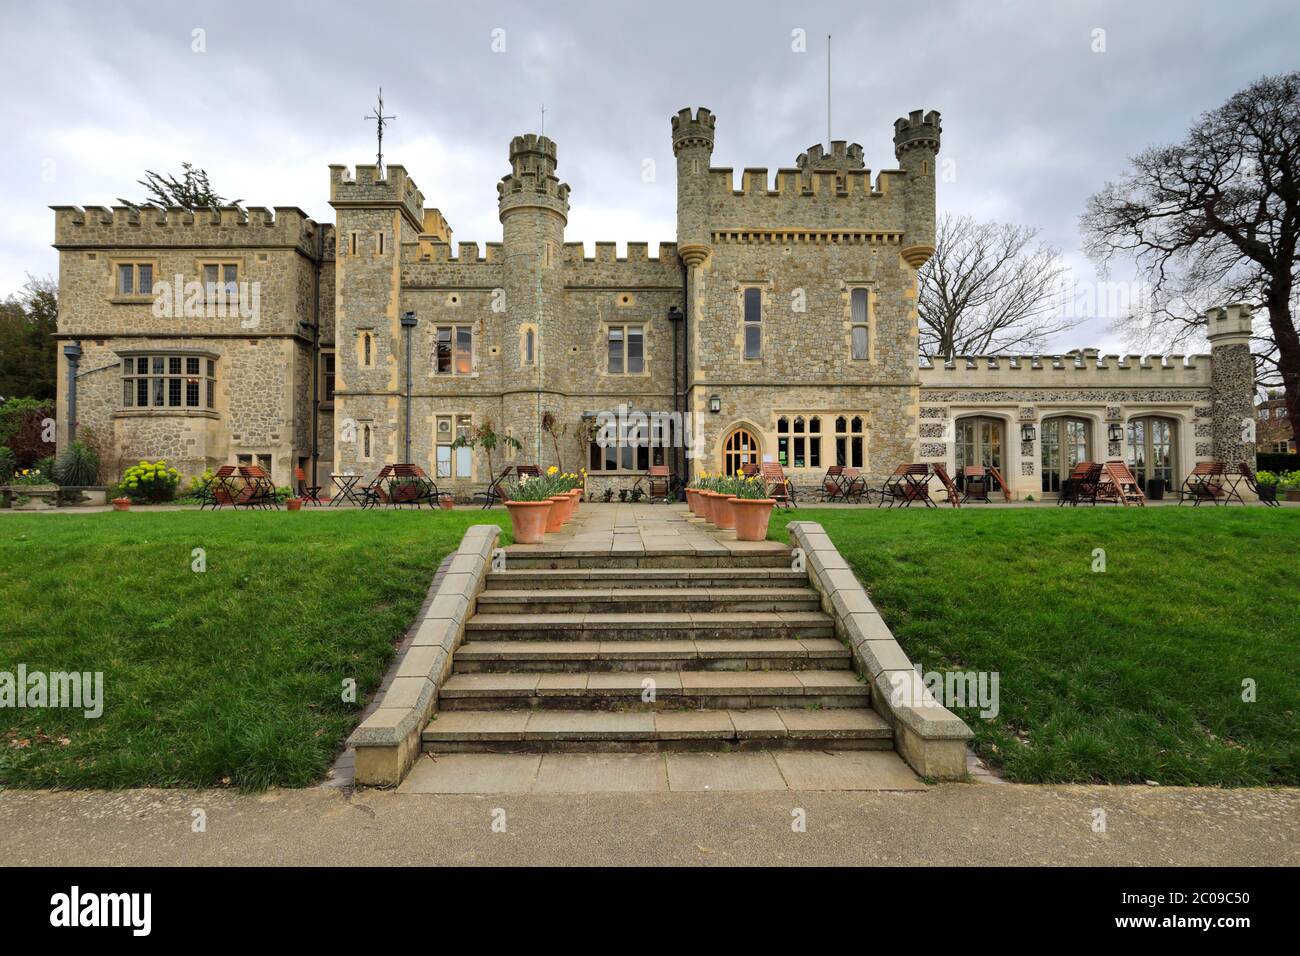 Whitstable Castle and Gardens, Whitstable town, Kent County; England; UK Stock Photo